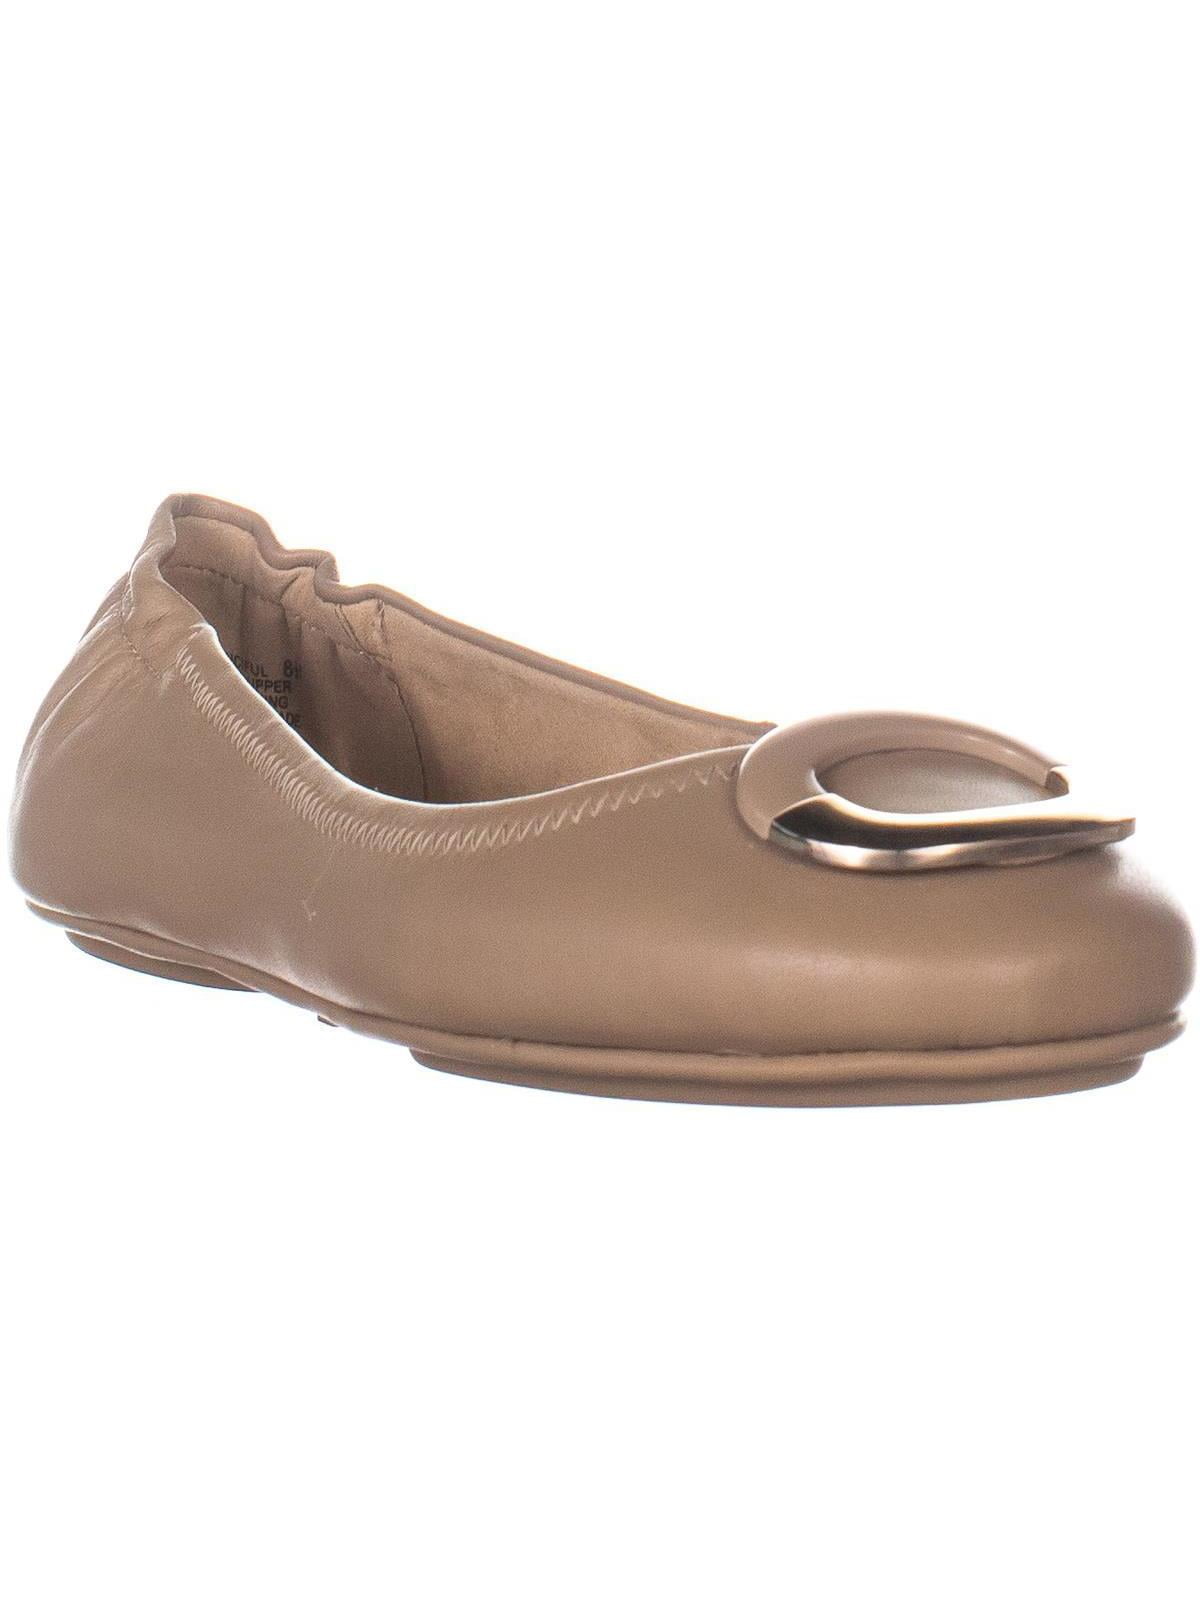 Womens Bandolino Fanciful Slip-On Ballet Flats, Light Natural Leather ...